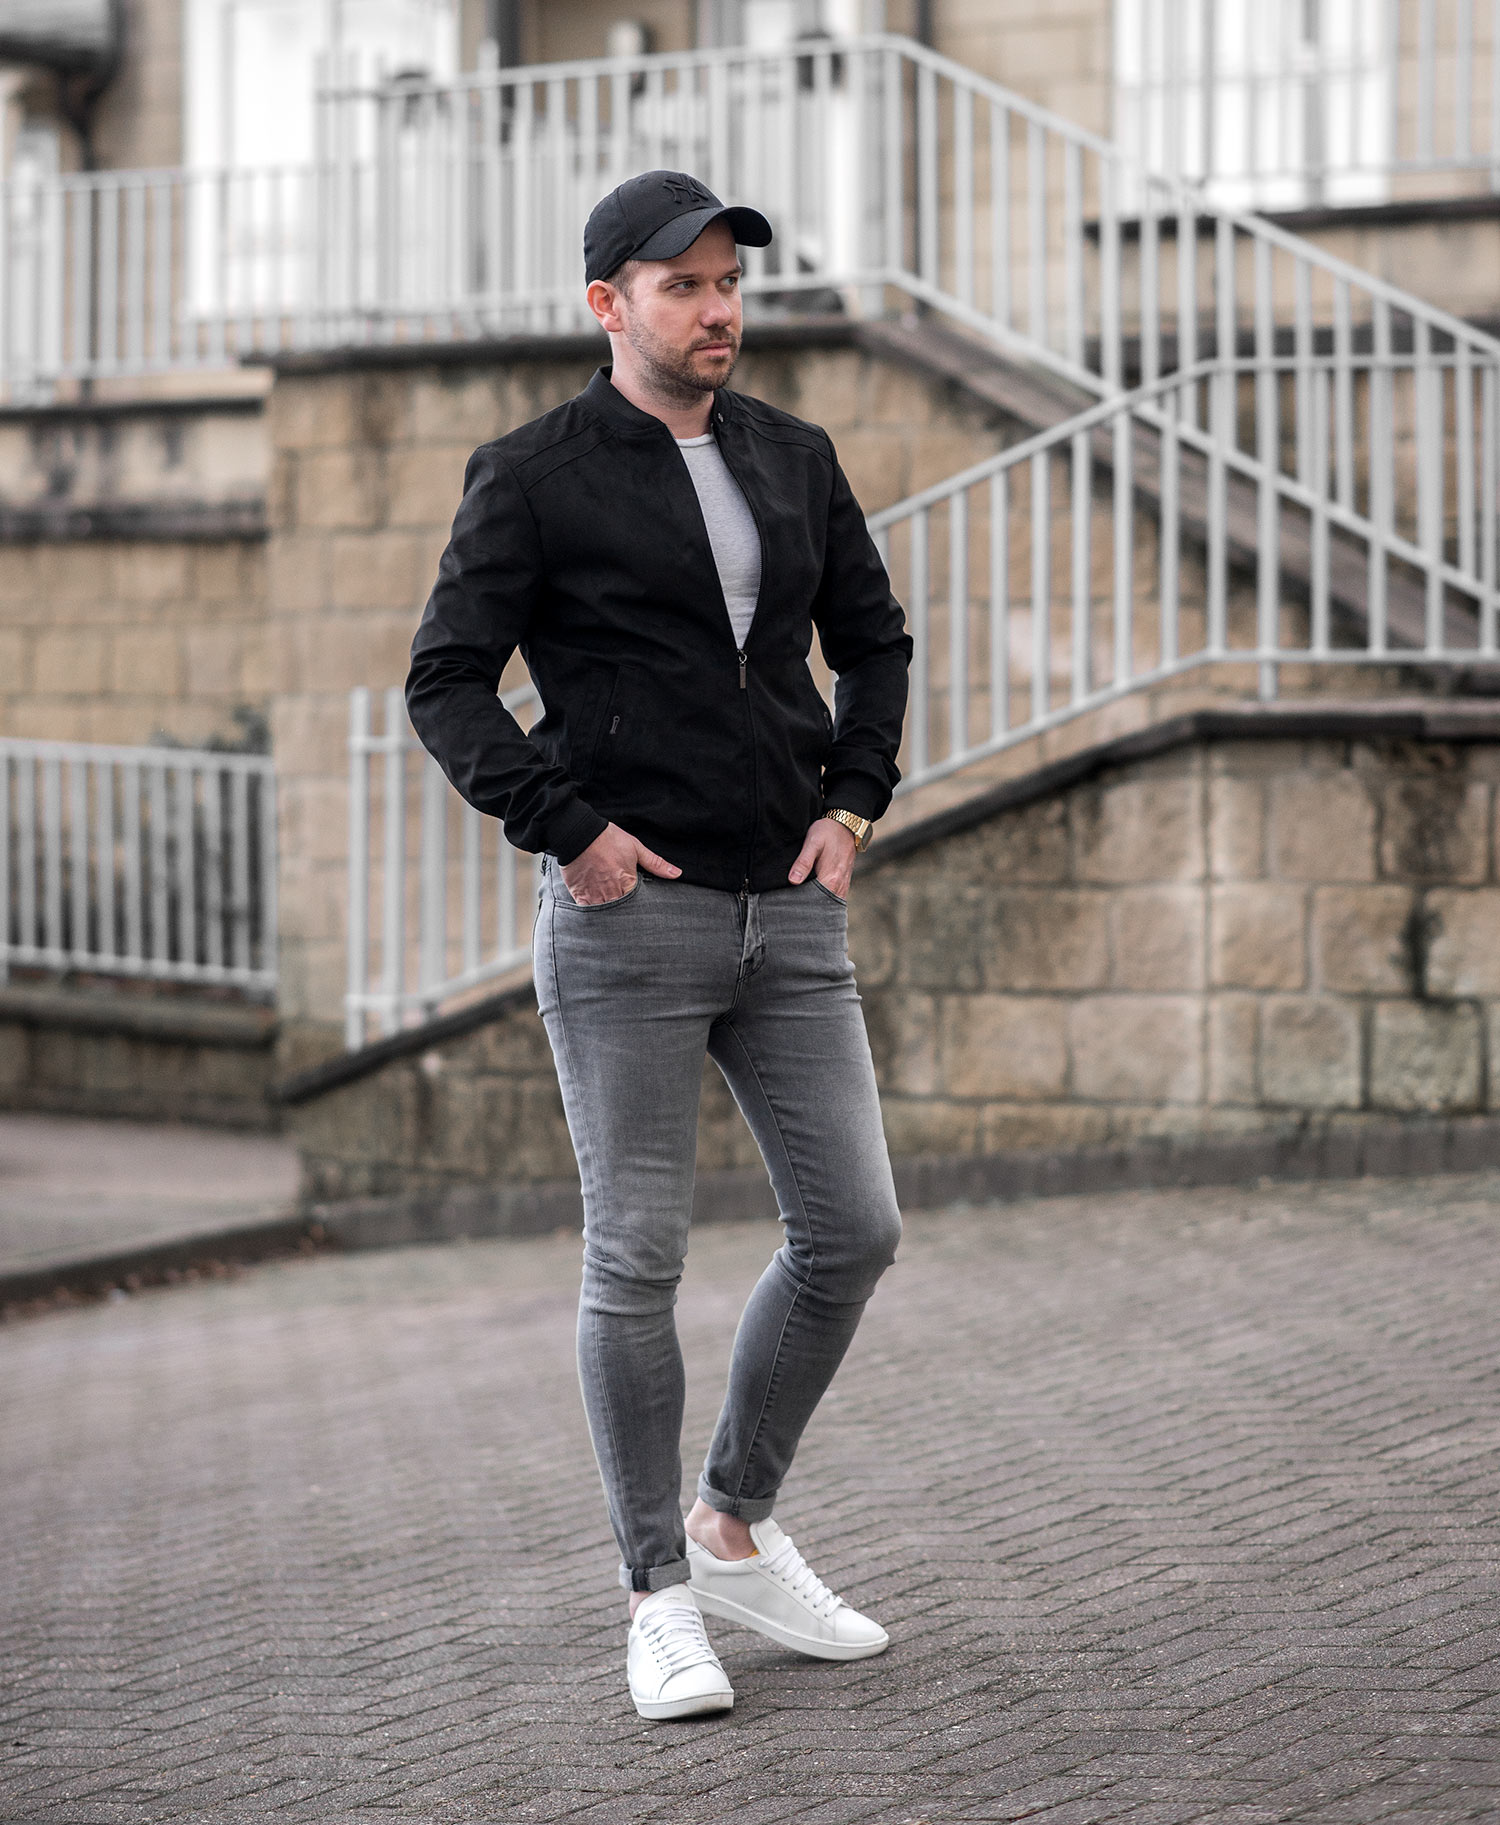 Styling A Black Suede Bomber Jacket - Your Average Guy